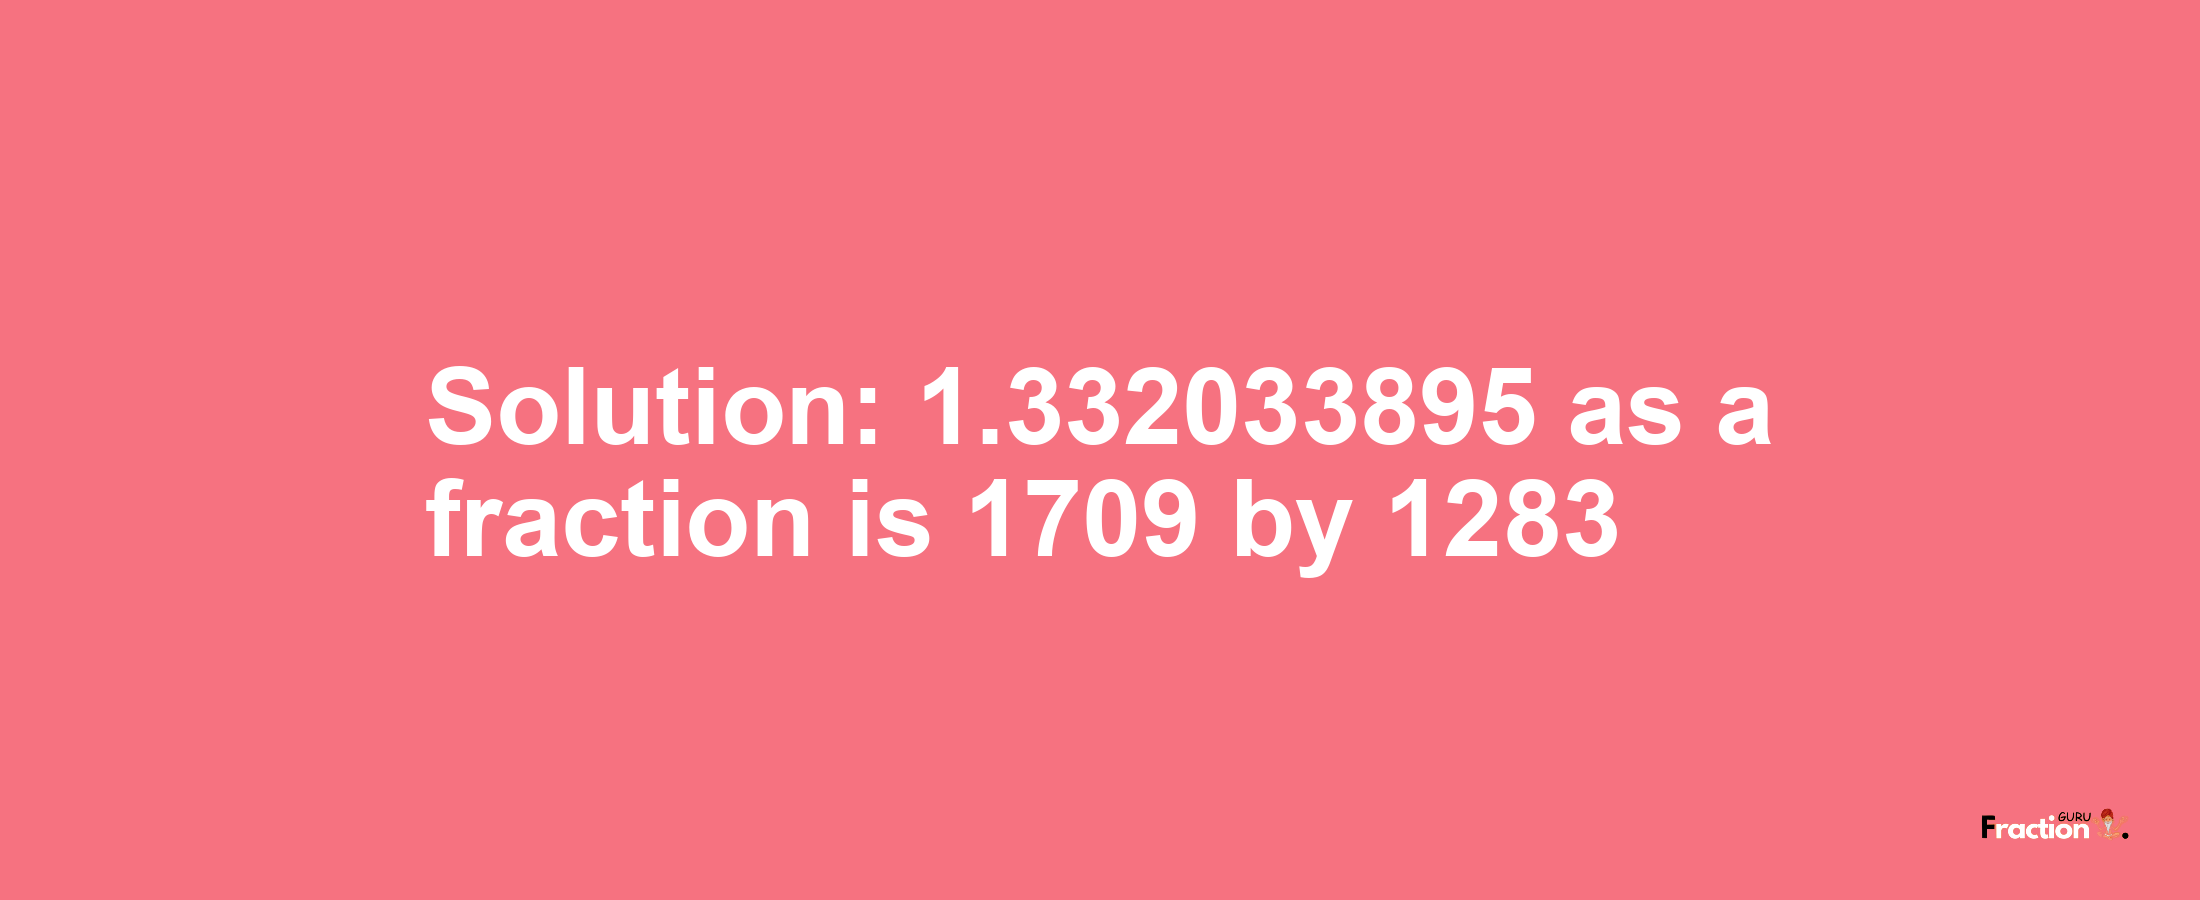 Solution:1.332033895 as a fraction is 1709/1283